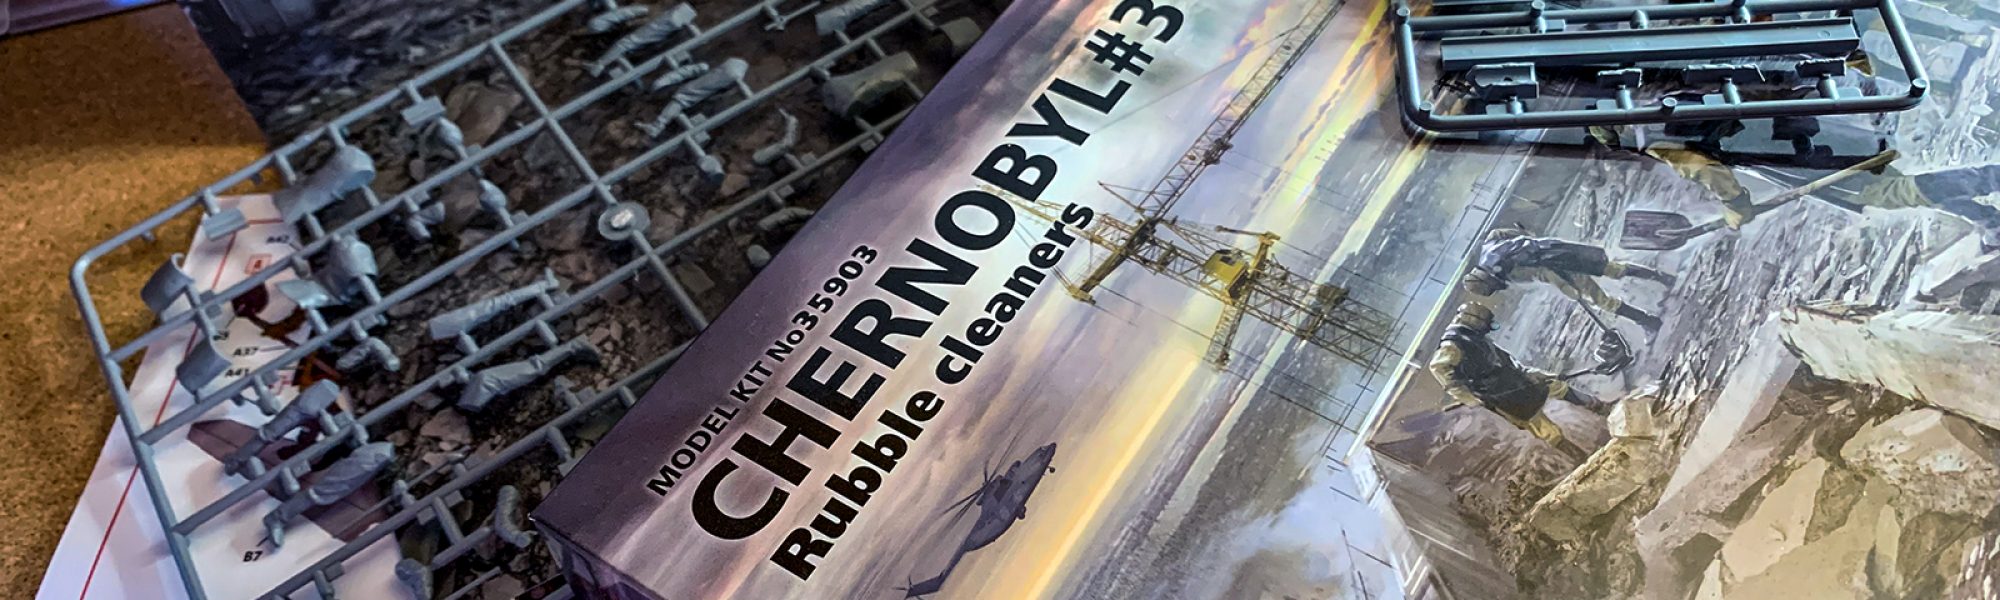 ICM Chernobyl model kit: Rubble cleaners